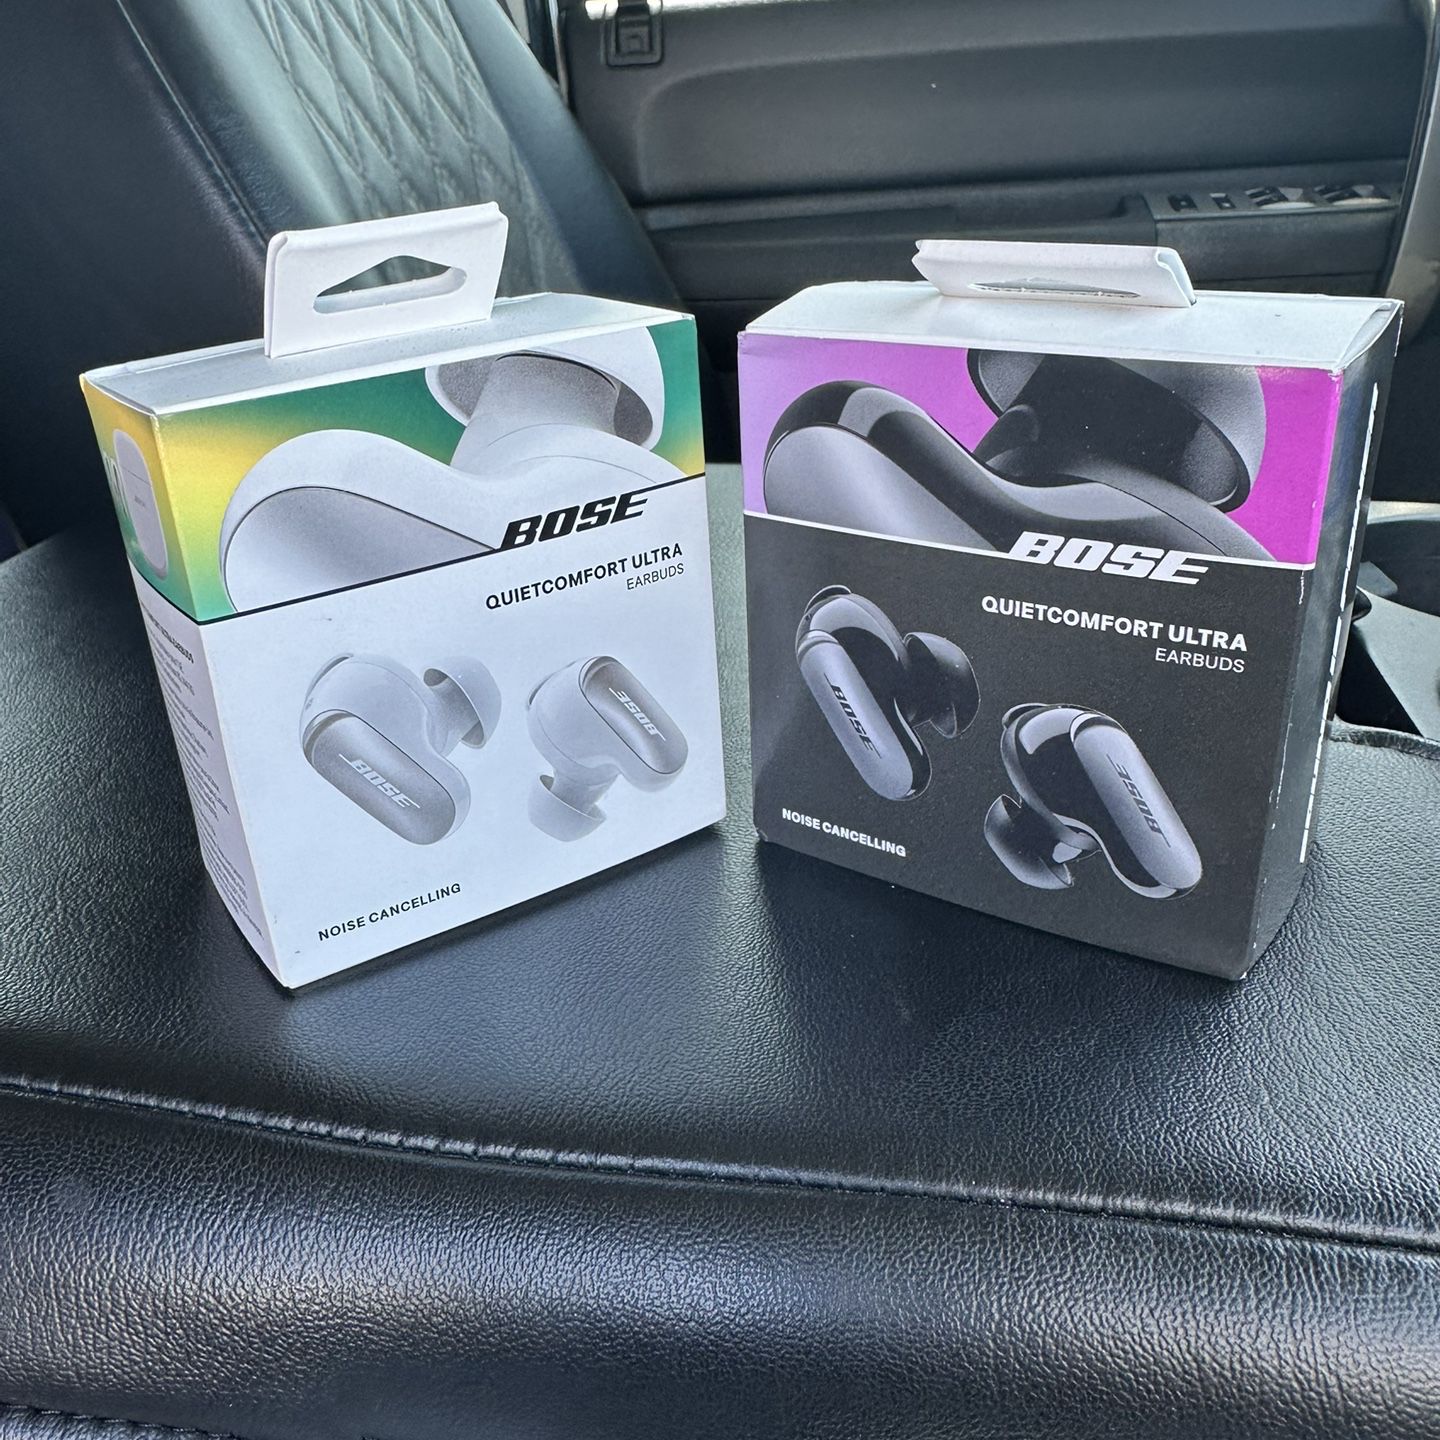 Bose Quietcomfort Ultra Earbuds. One Is White The Other One Is Black